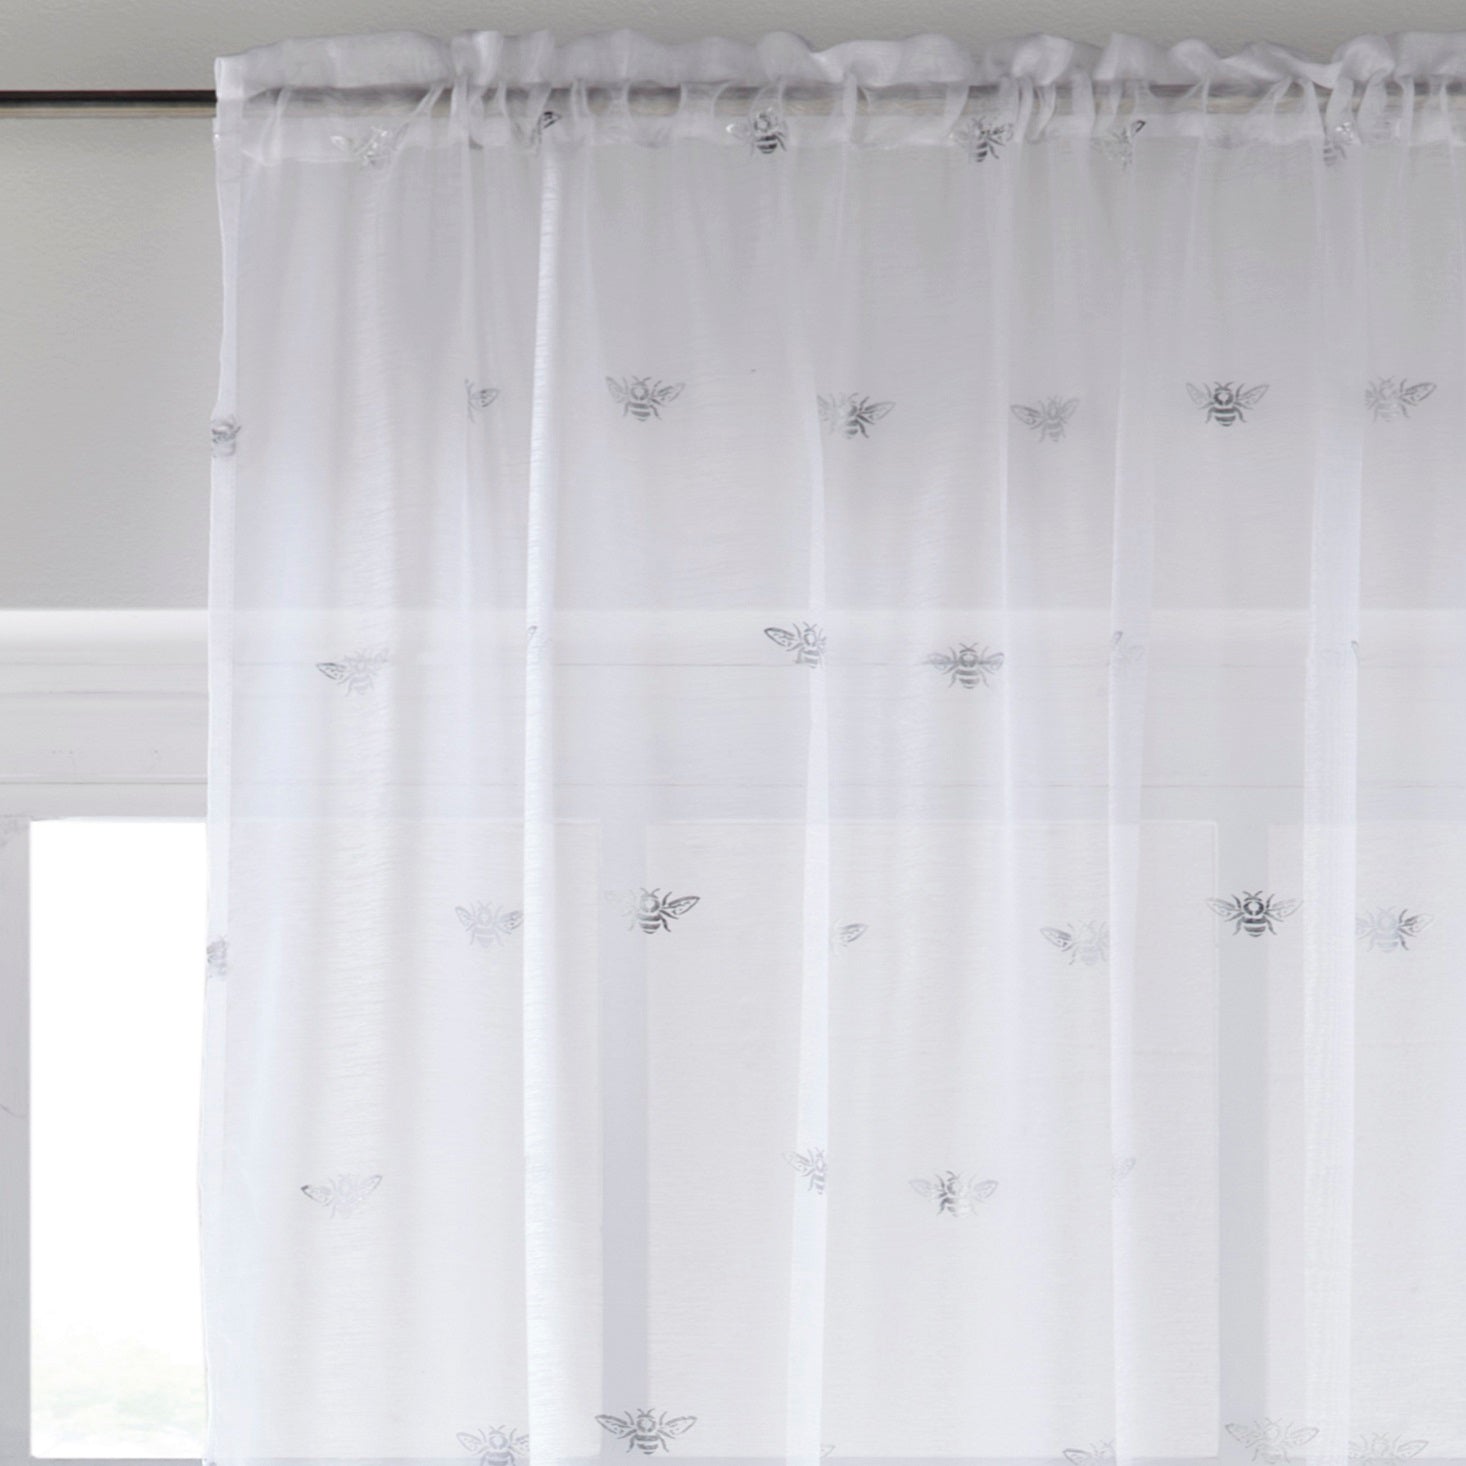 55x48" Sparkle Bees Voile Net Curtains Panel - White & Silver Grey